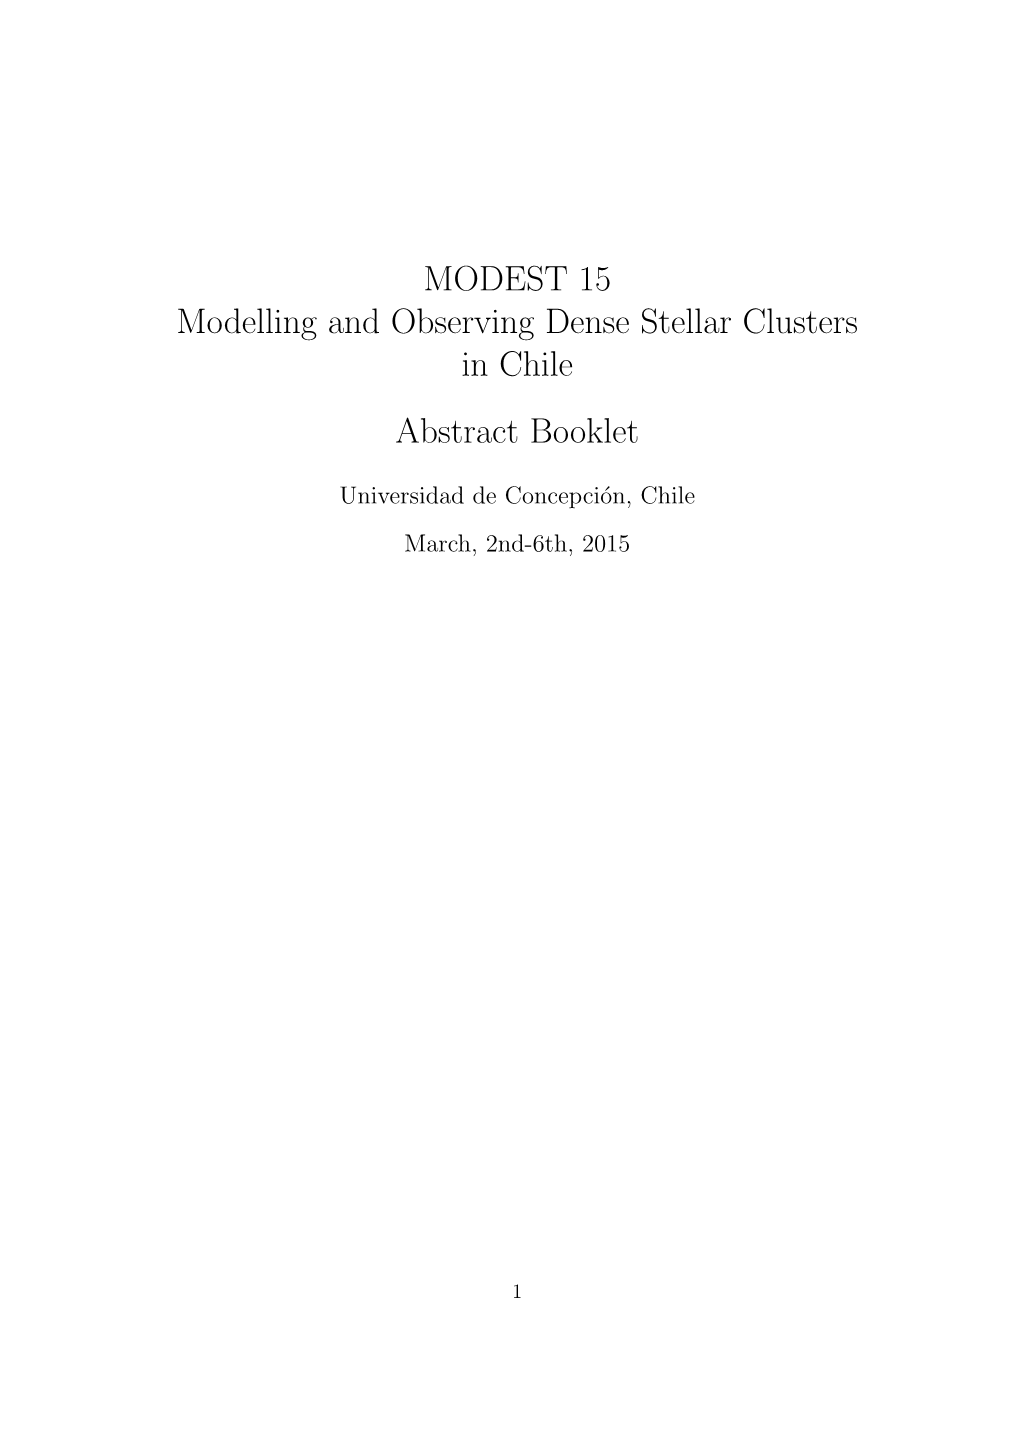 MODEST 15 Modelling and Observing Dense Stellar Clusters in Chile Abstract Booklet